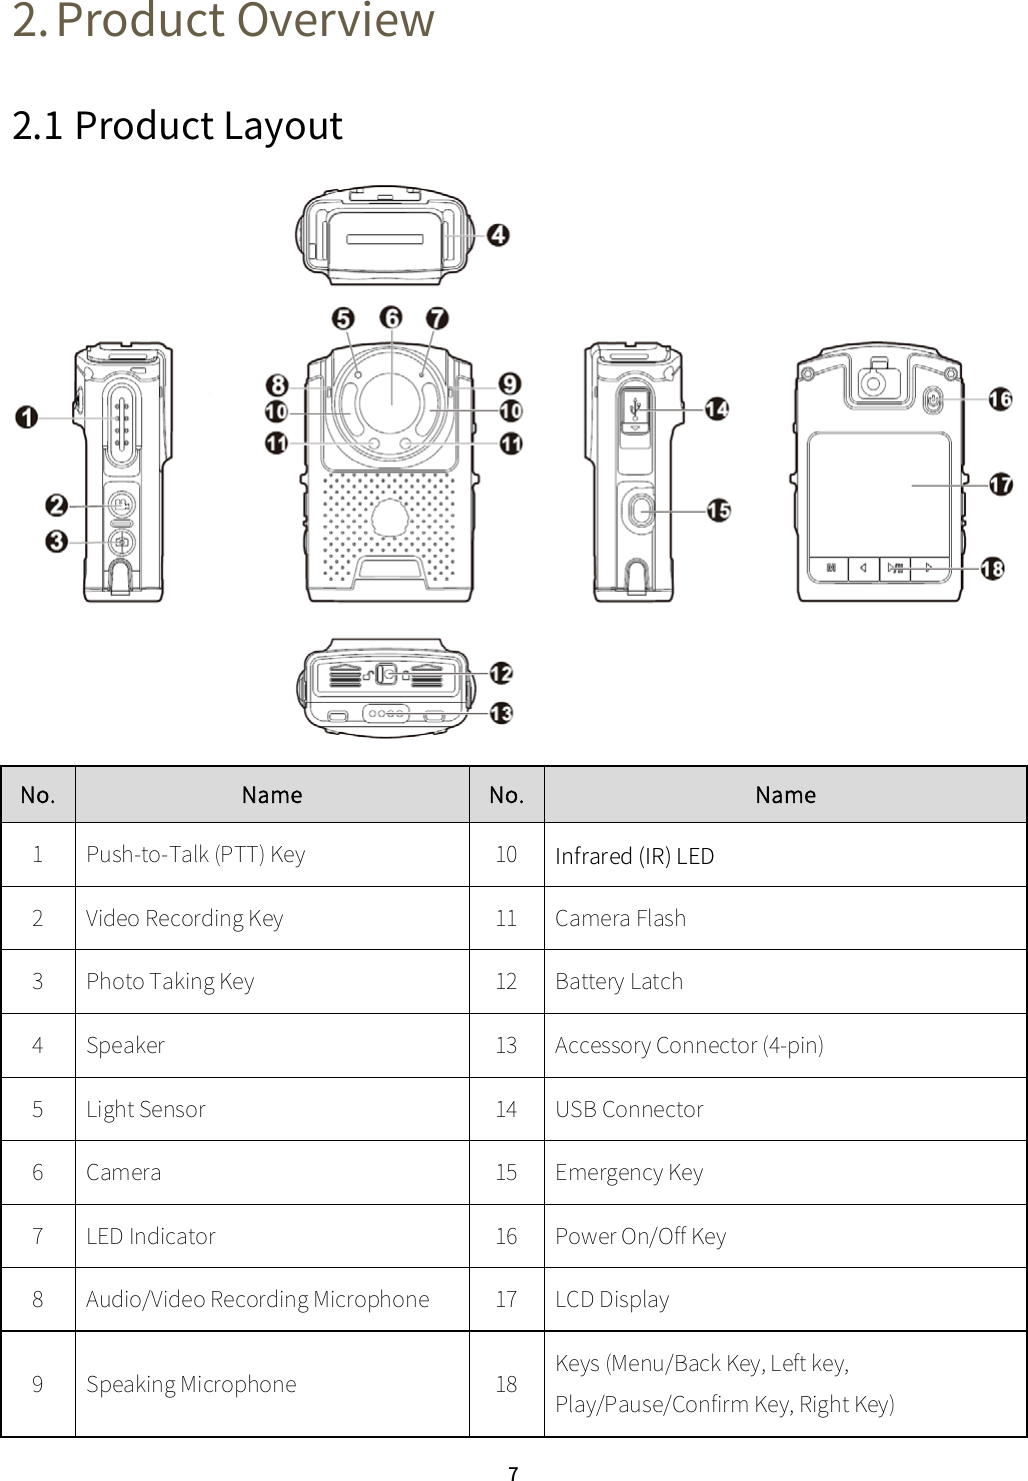  7 2. Product Overview 2.1 Product Layout  No. Name No. Name 1 Push-to-Talk (PTT) Key 10 Infrared (IR) LED 2 Video Recording Key 11 Camera Flash 3 Photo Taking Key 12 Battery Latch 4 Speaker 13 Accessory Connector (4-pin) 5 Light Sensor 14 USB Connector 6 Camera   15 Emergency Key 7 LED Indicator 16 Power On/Off Key 8 Audio/Video Recording Microphone 17 LCD Display 9  Speaking Microphone 18 Keys (Menu/Back Key, Left key, Play/Pause/Confirm Key, Right Key) 